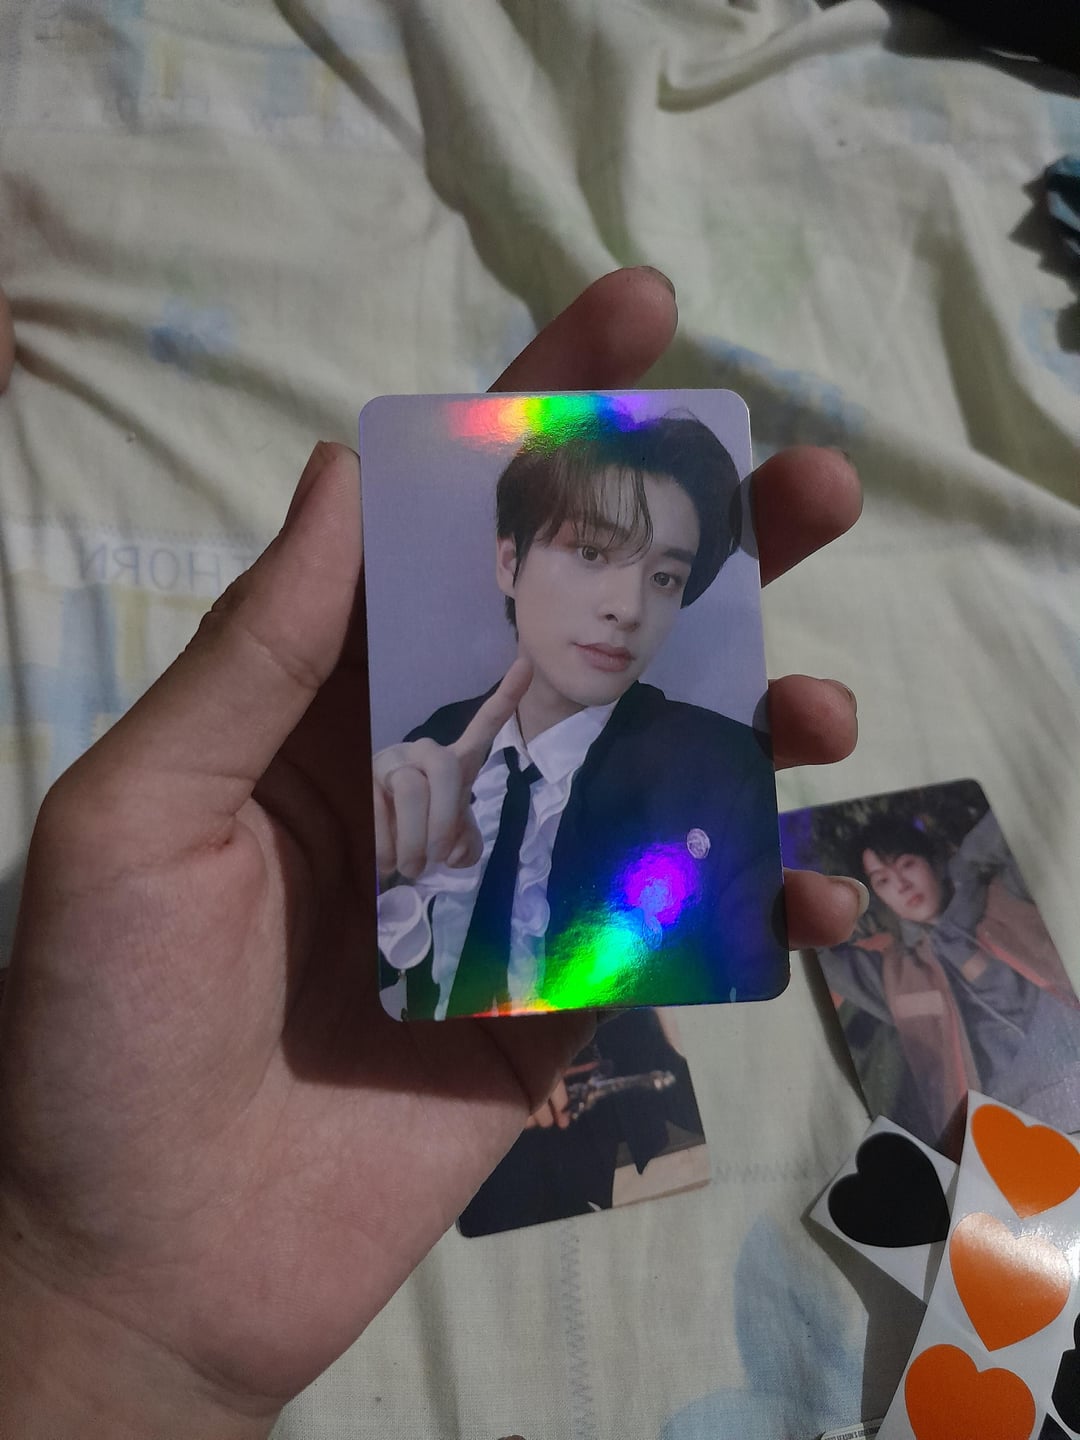 ARE THESE OFFICIAL PHOTOCARDS?